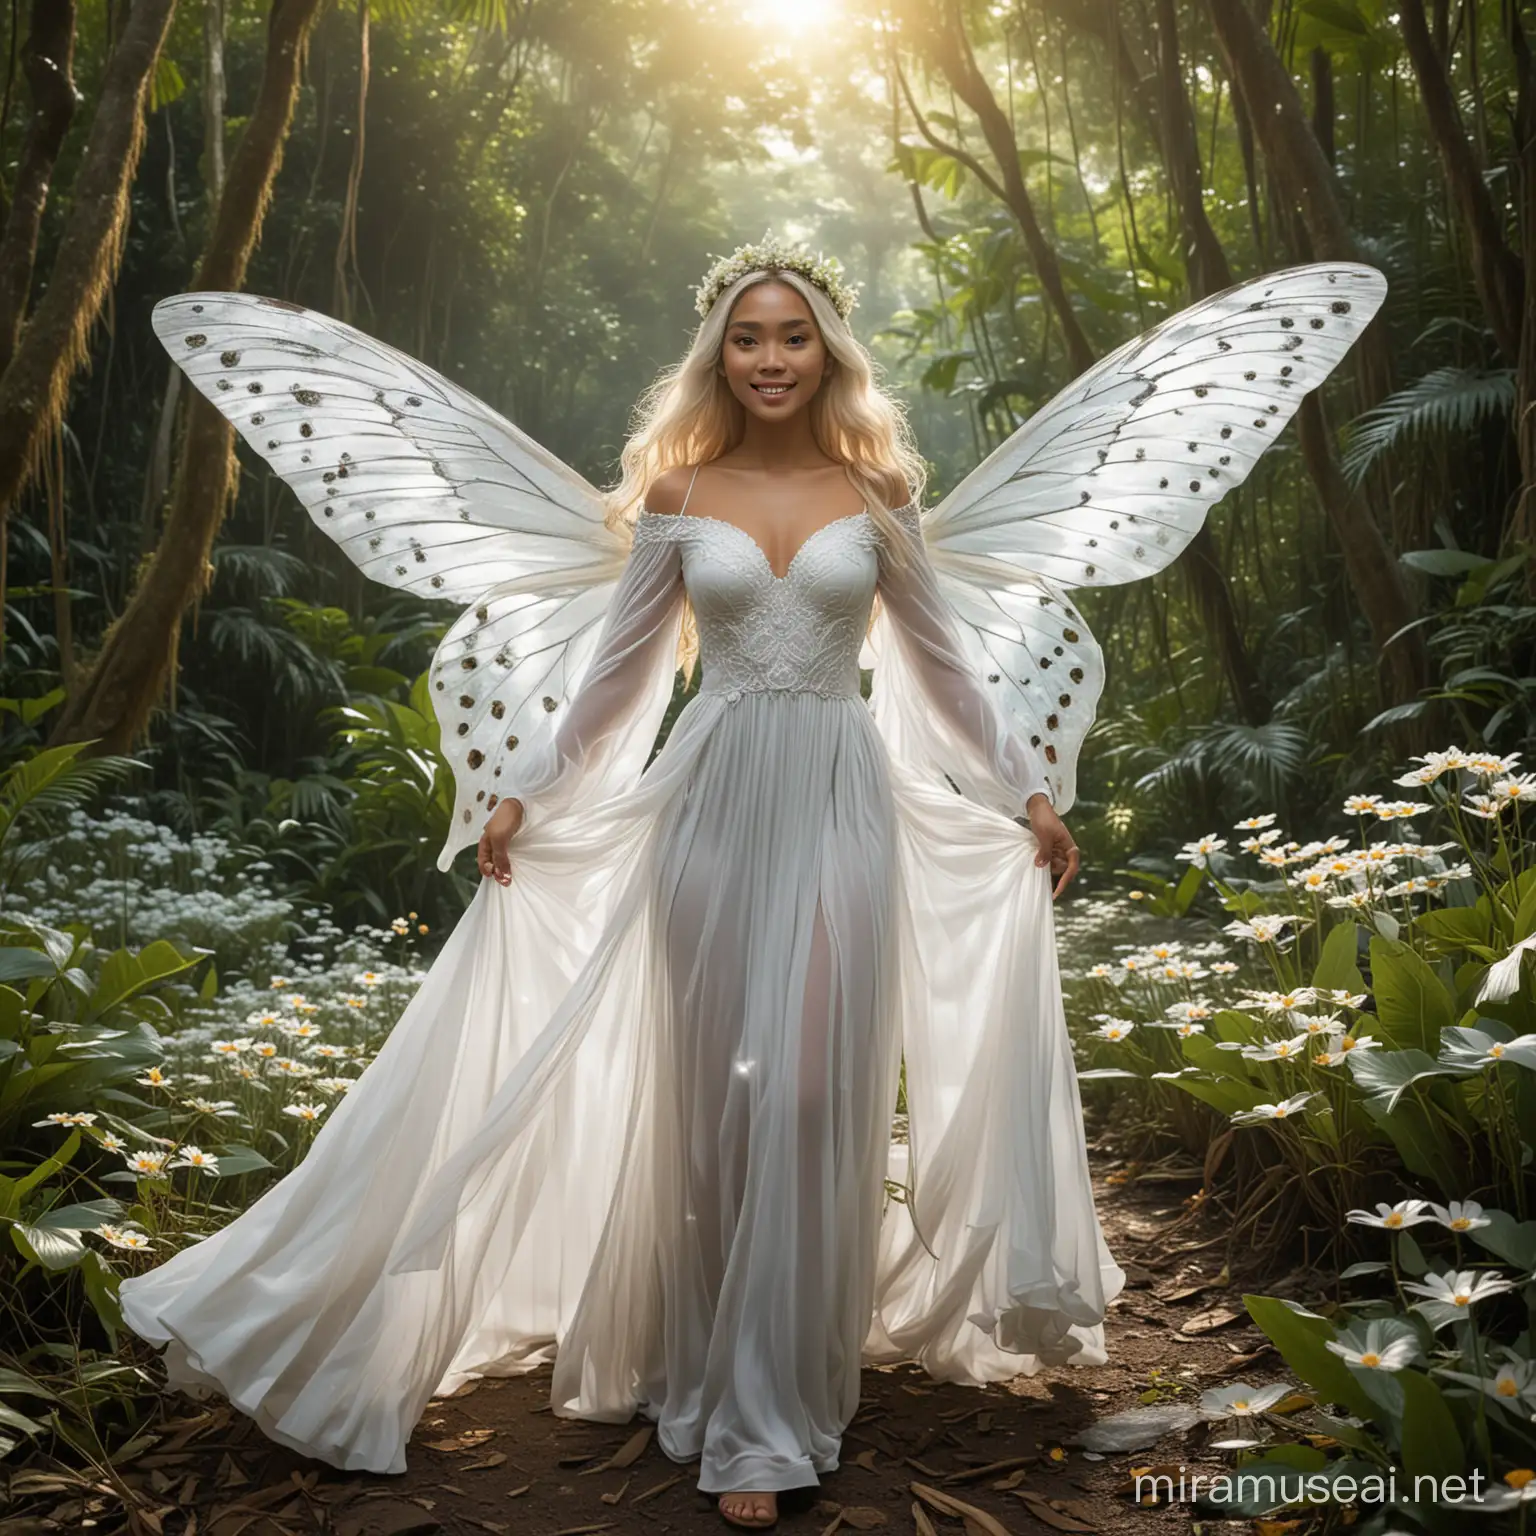 A beautiful and glowing filipino nymph with light-colored hair and mestiza features, wearing a long-sleeved flowing white gown and a crown of flowers, she has large butterfly wings and carries a magic wand with a glowing tip, she is floating above a group of hikers in the middle of a tropical jungle.